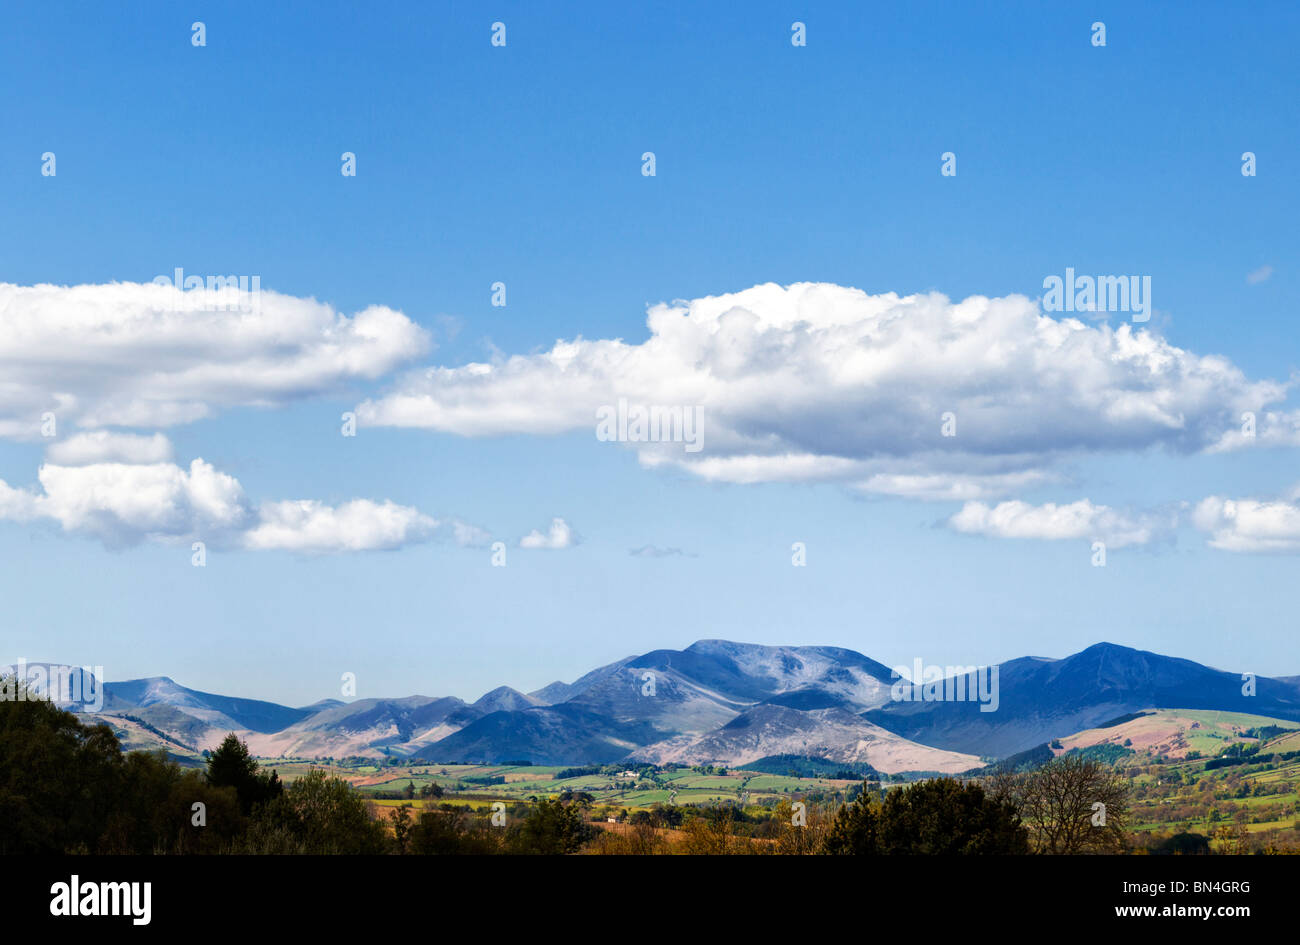 Mountains in the English Lake District, Cumbria, England, UK - looking towards the Derwent fells near Keswick. Stock Photo